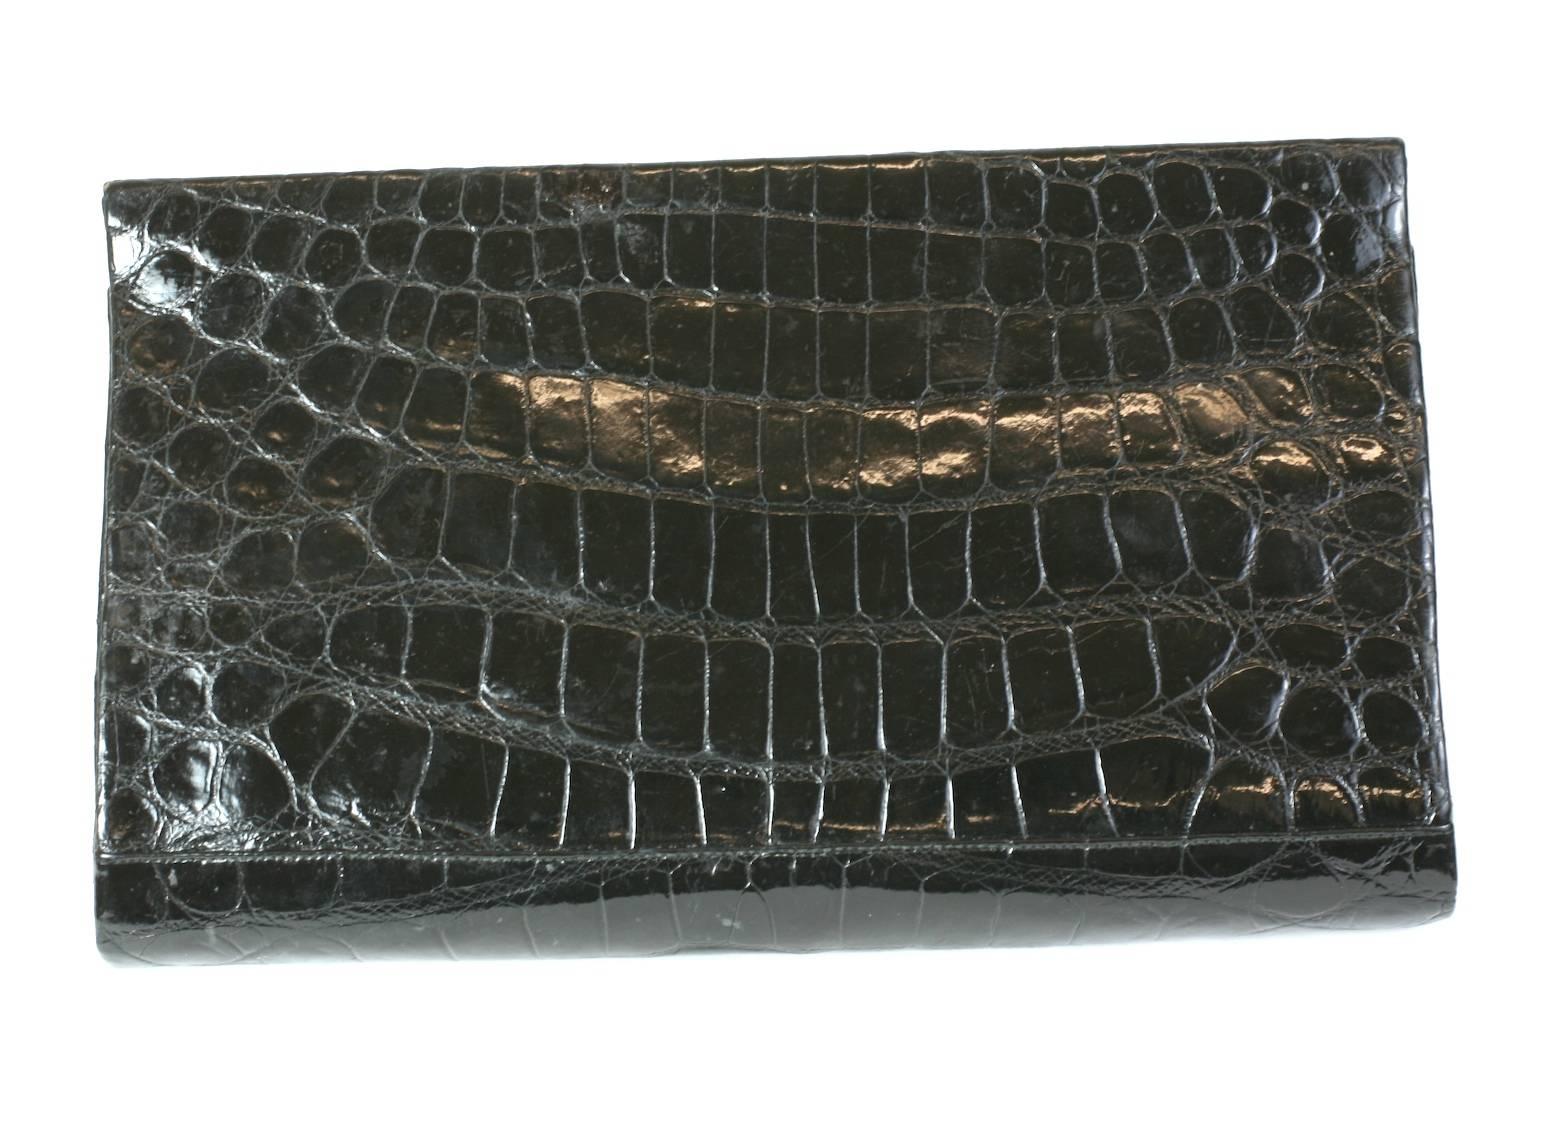 Manon Black Alligator Clutch with retractable silver chain handles. Simple elegant shape with central compartment and 2 side compartments for small items (chains are held here). Small marcasite stones trim the corners. 1960's USA.  Chains